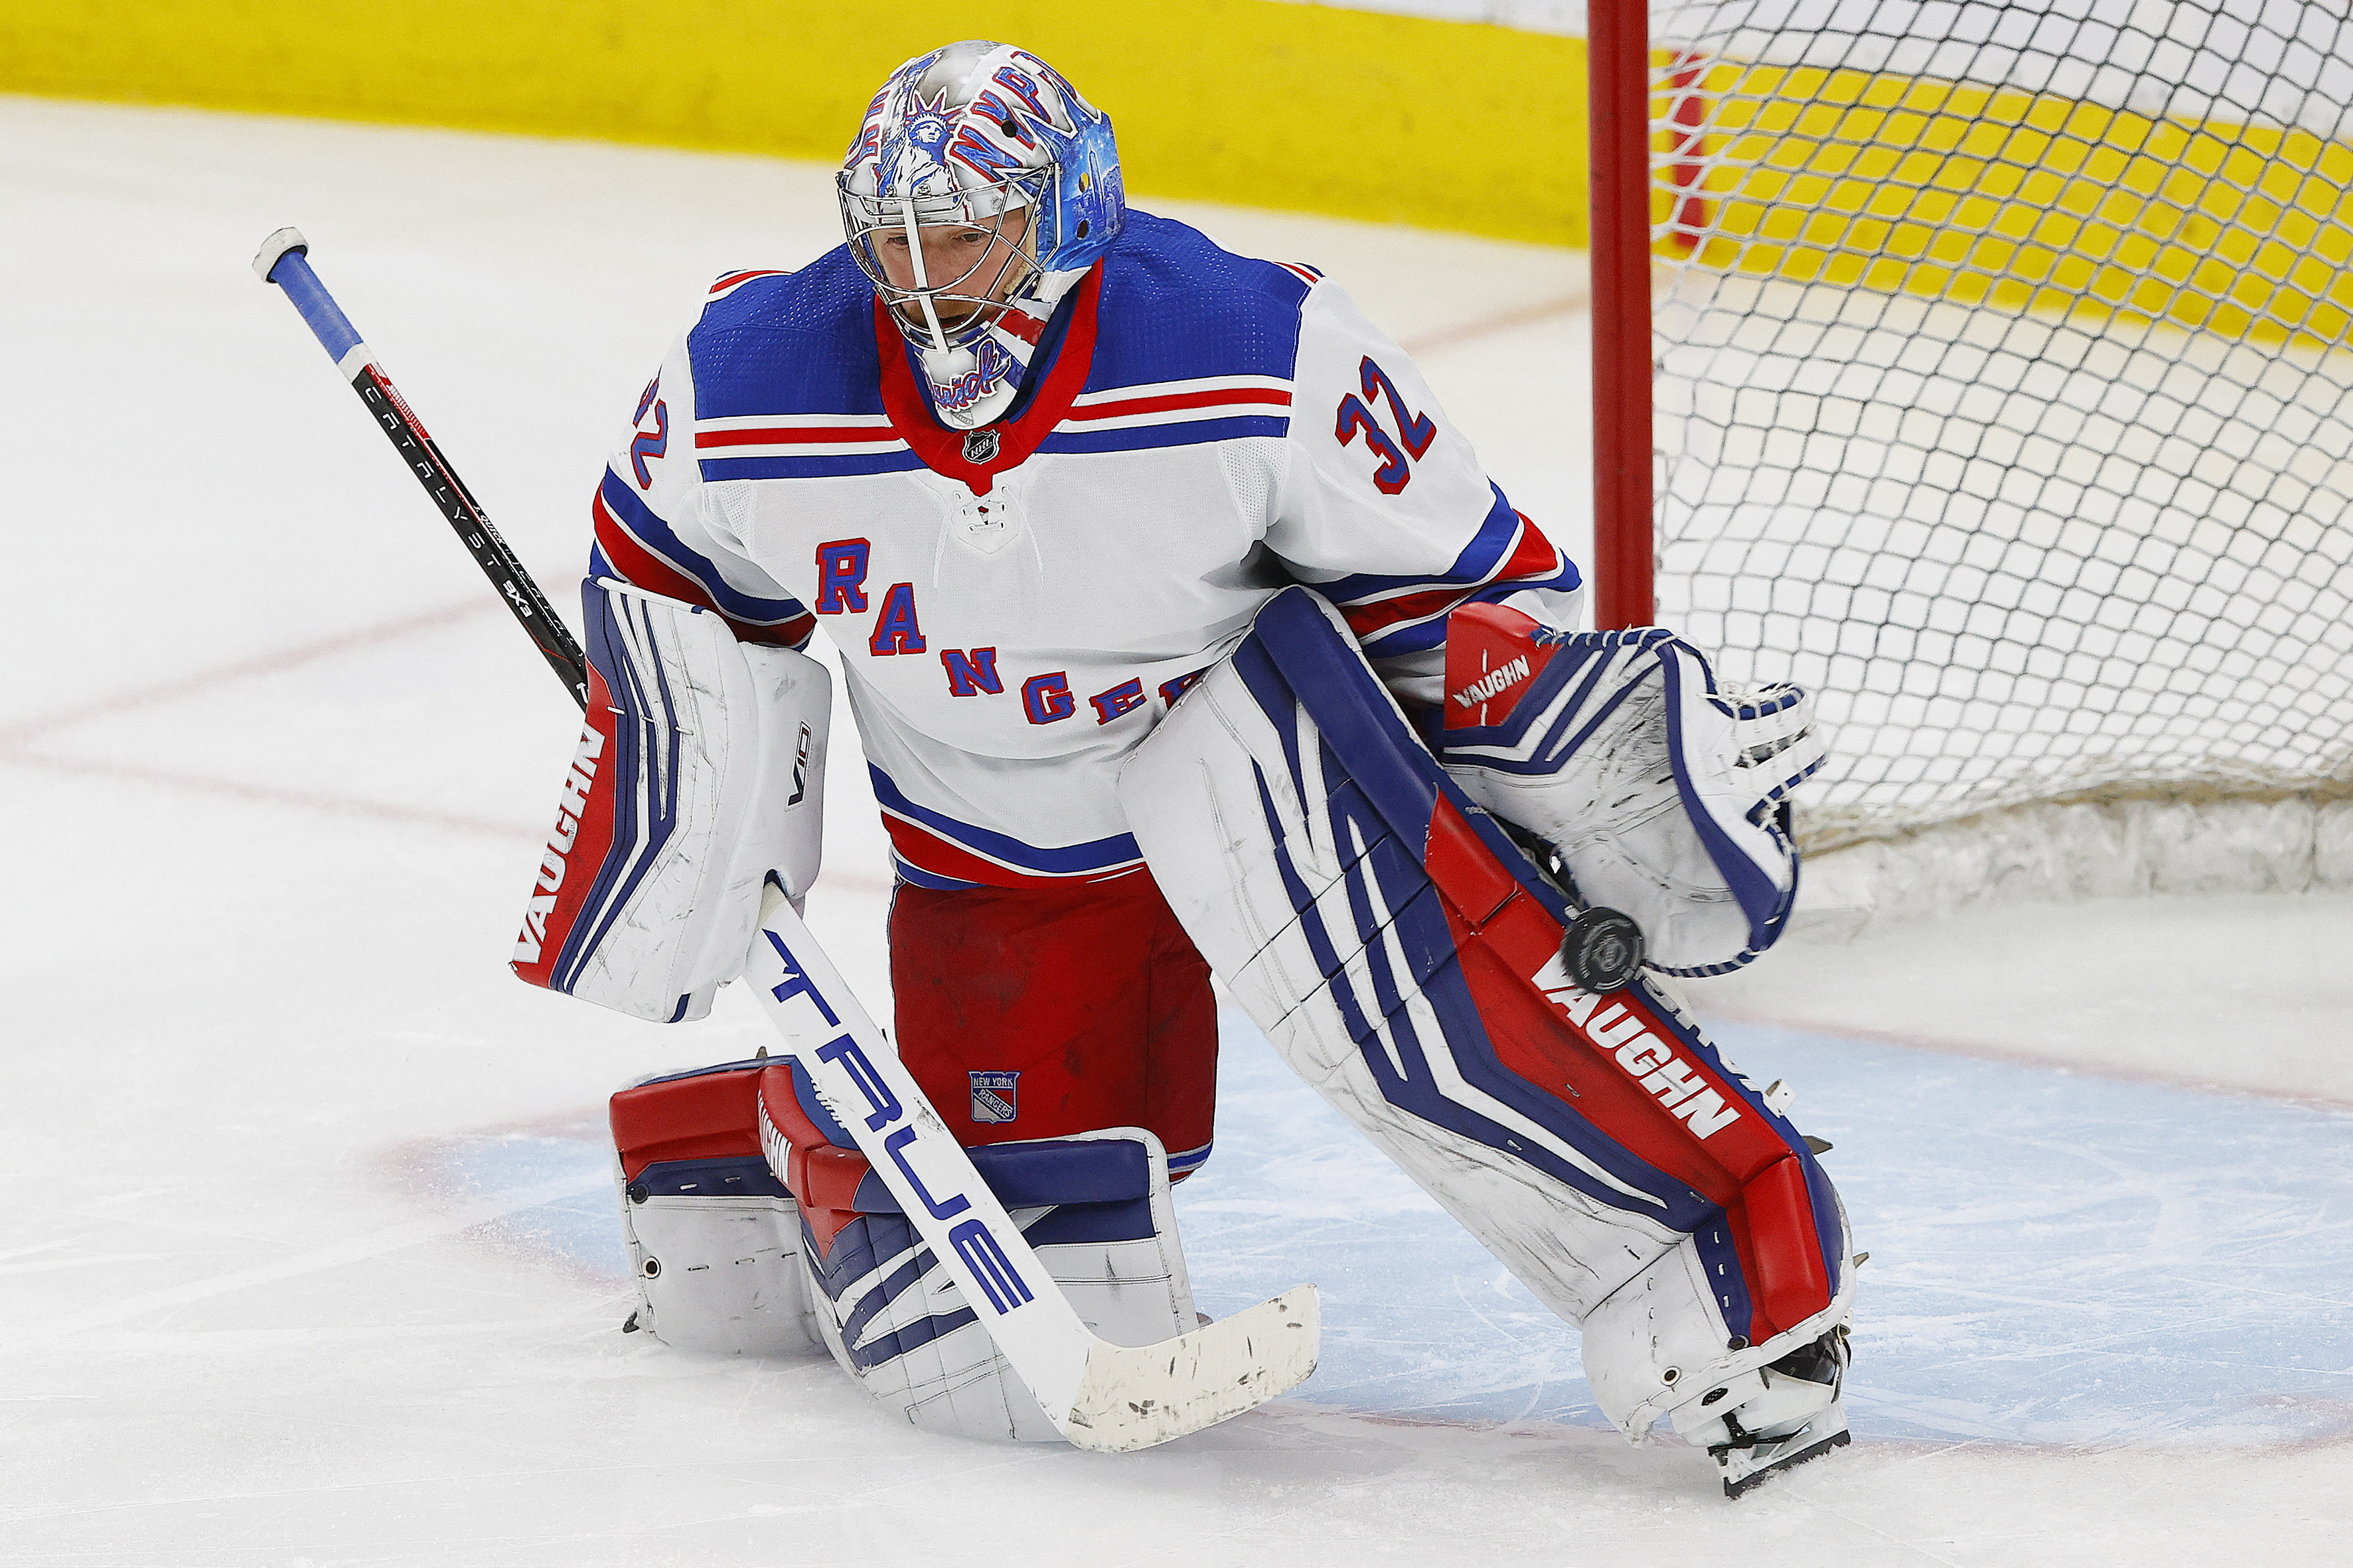 Could the New York Jets follow the New York Rangers' lead?